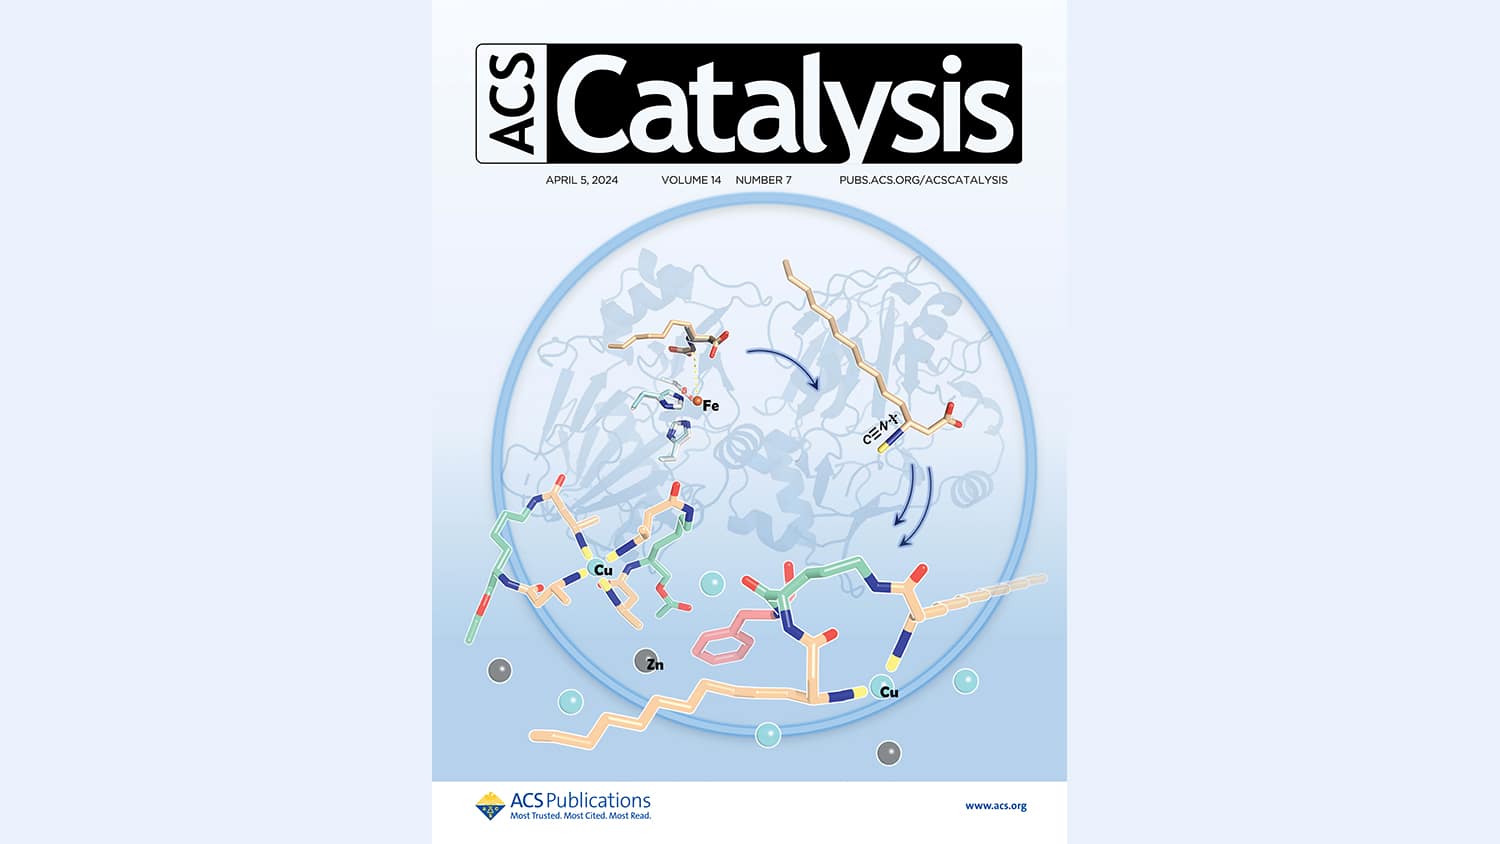 A journal cover by Chang and collaborators selected as supplementary journal cover at ACS catalysis